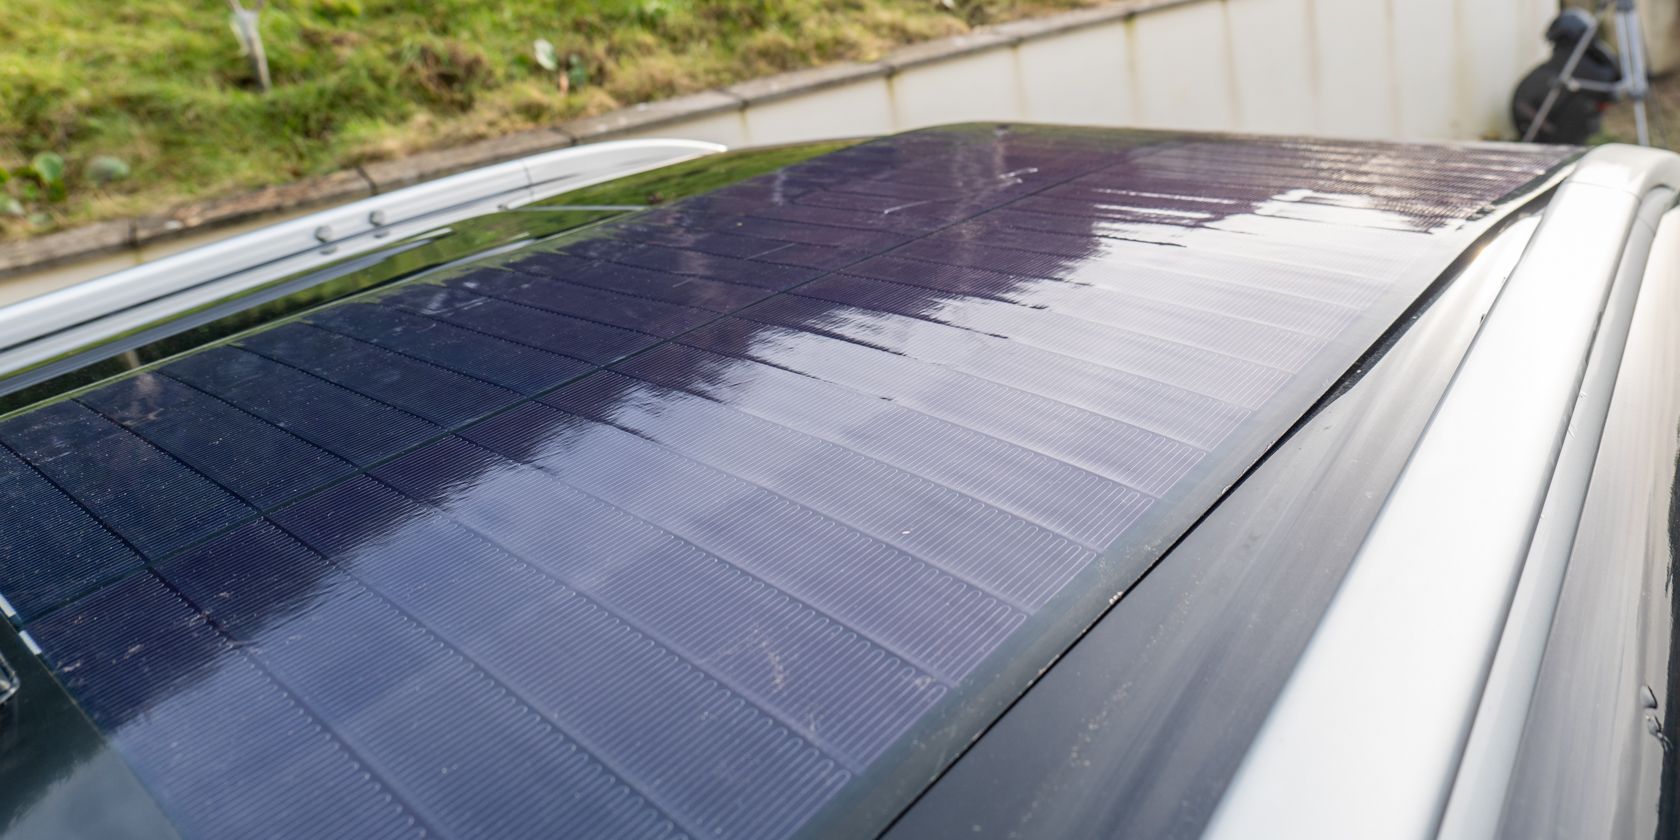 BougeRV Yuma 200W Flexible Solar Panel Review: Peel-and-Stick